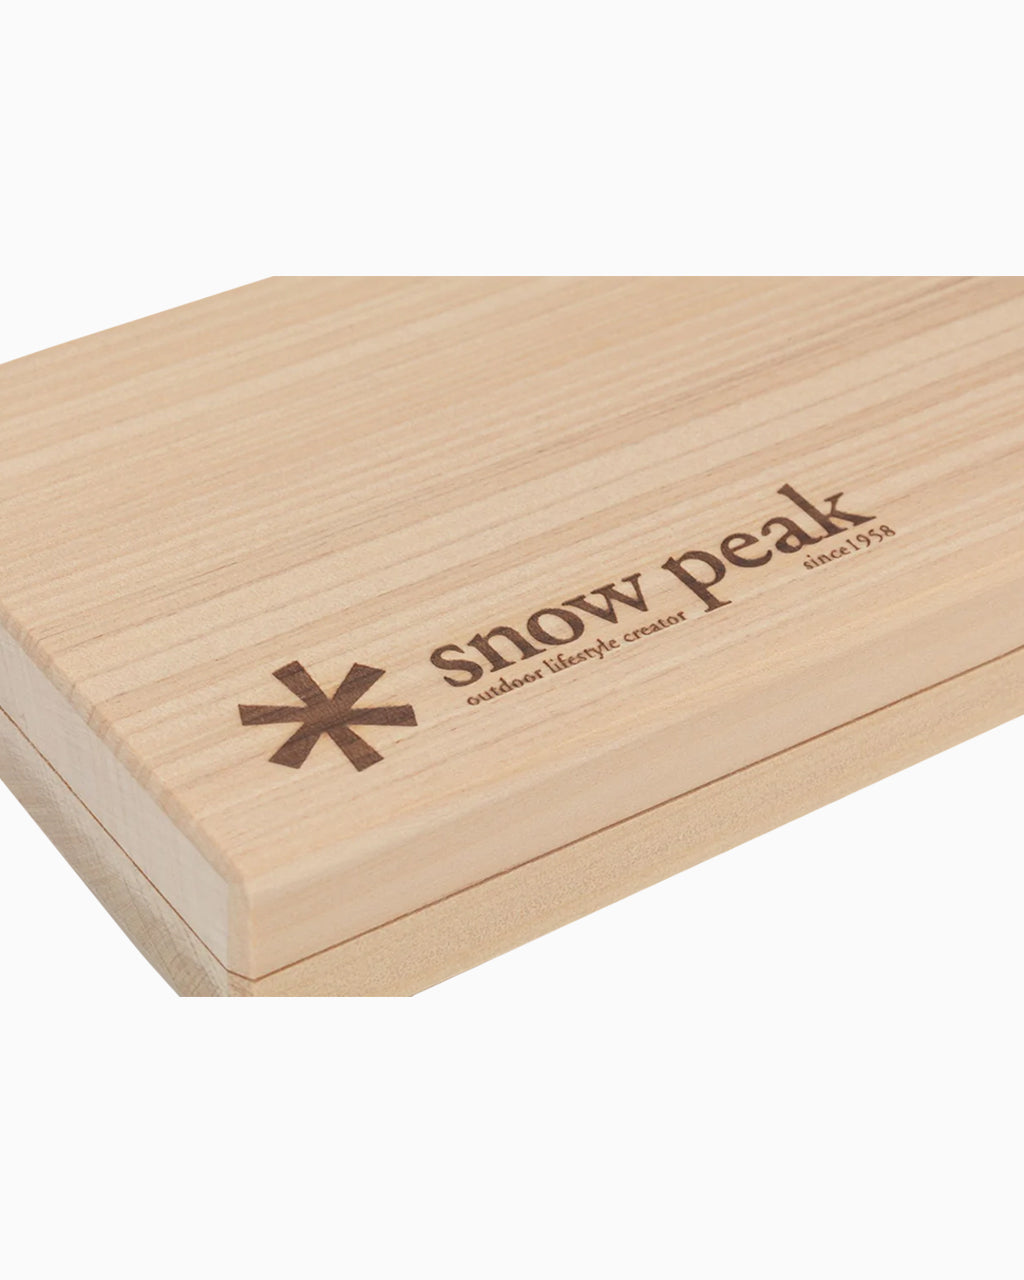 Snow Peak Chopping Board Set - Birch Wood Cutting Board & Stainless Steel  Chef Knife - Kitchen Cookware Set for Outdoor Cooking - Essential Gear for